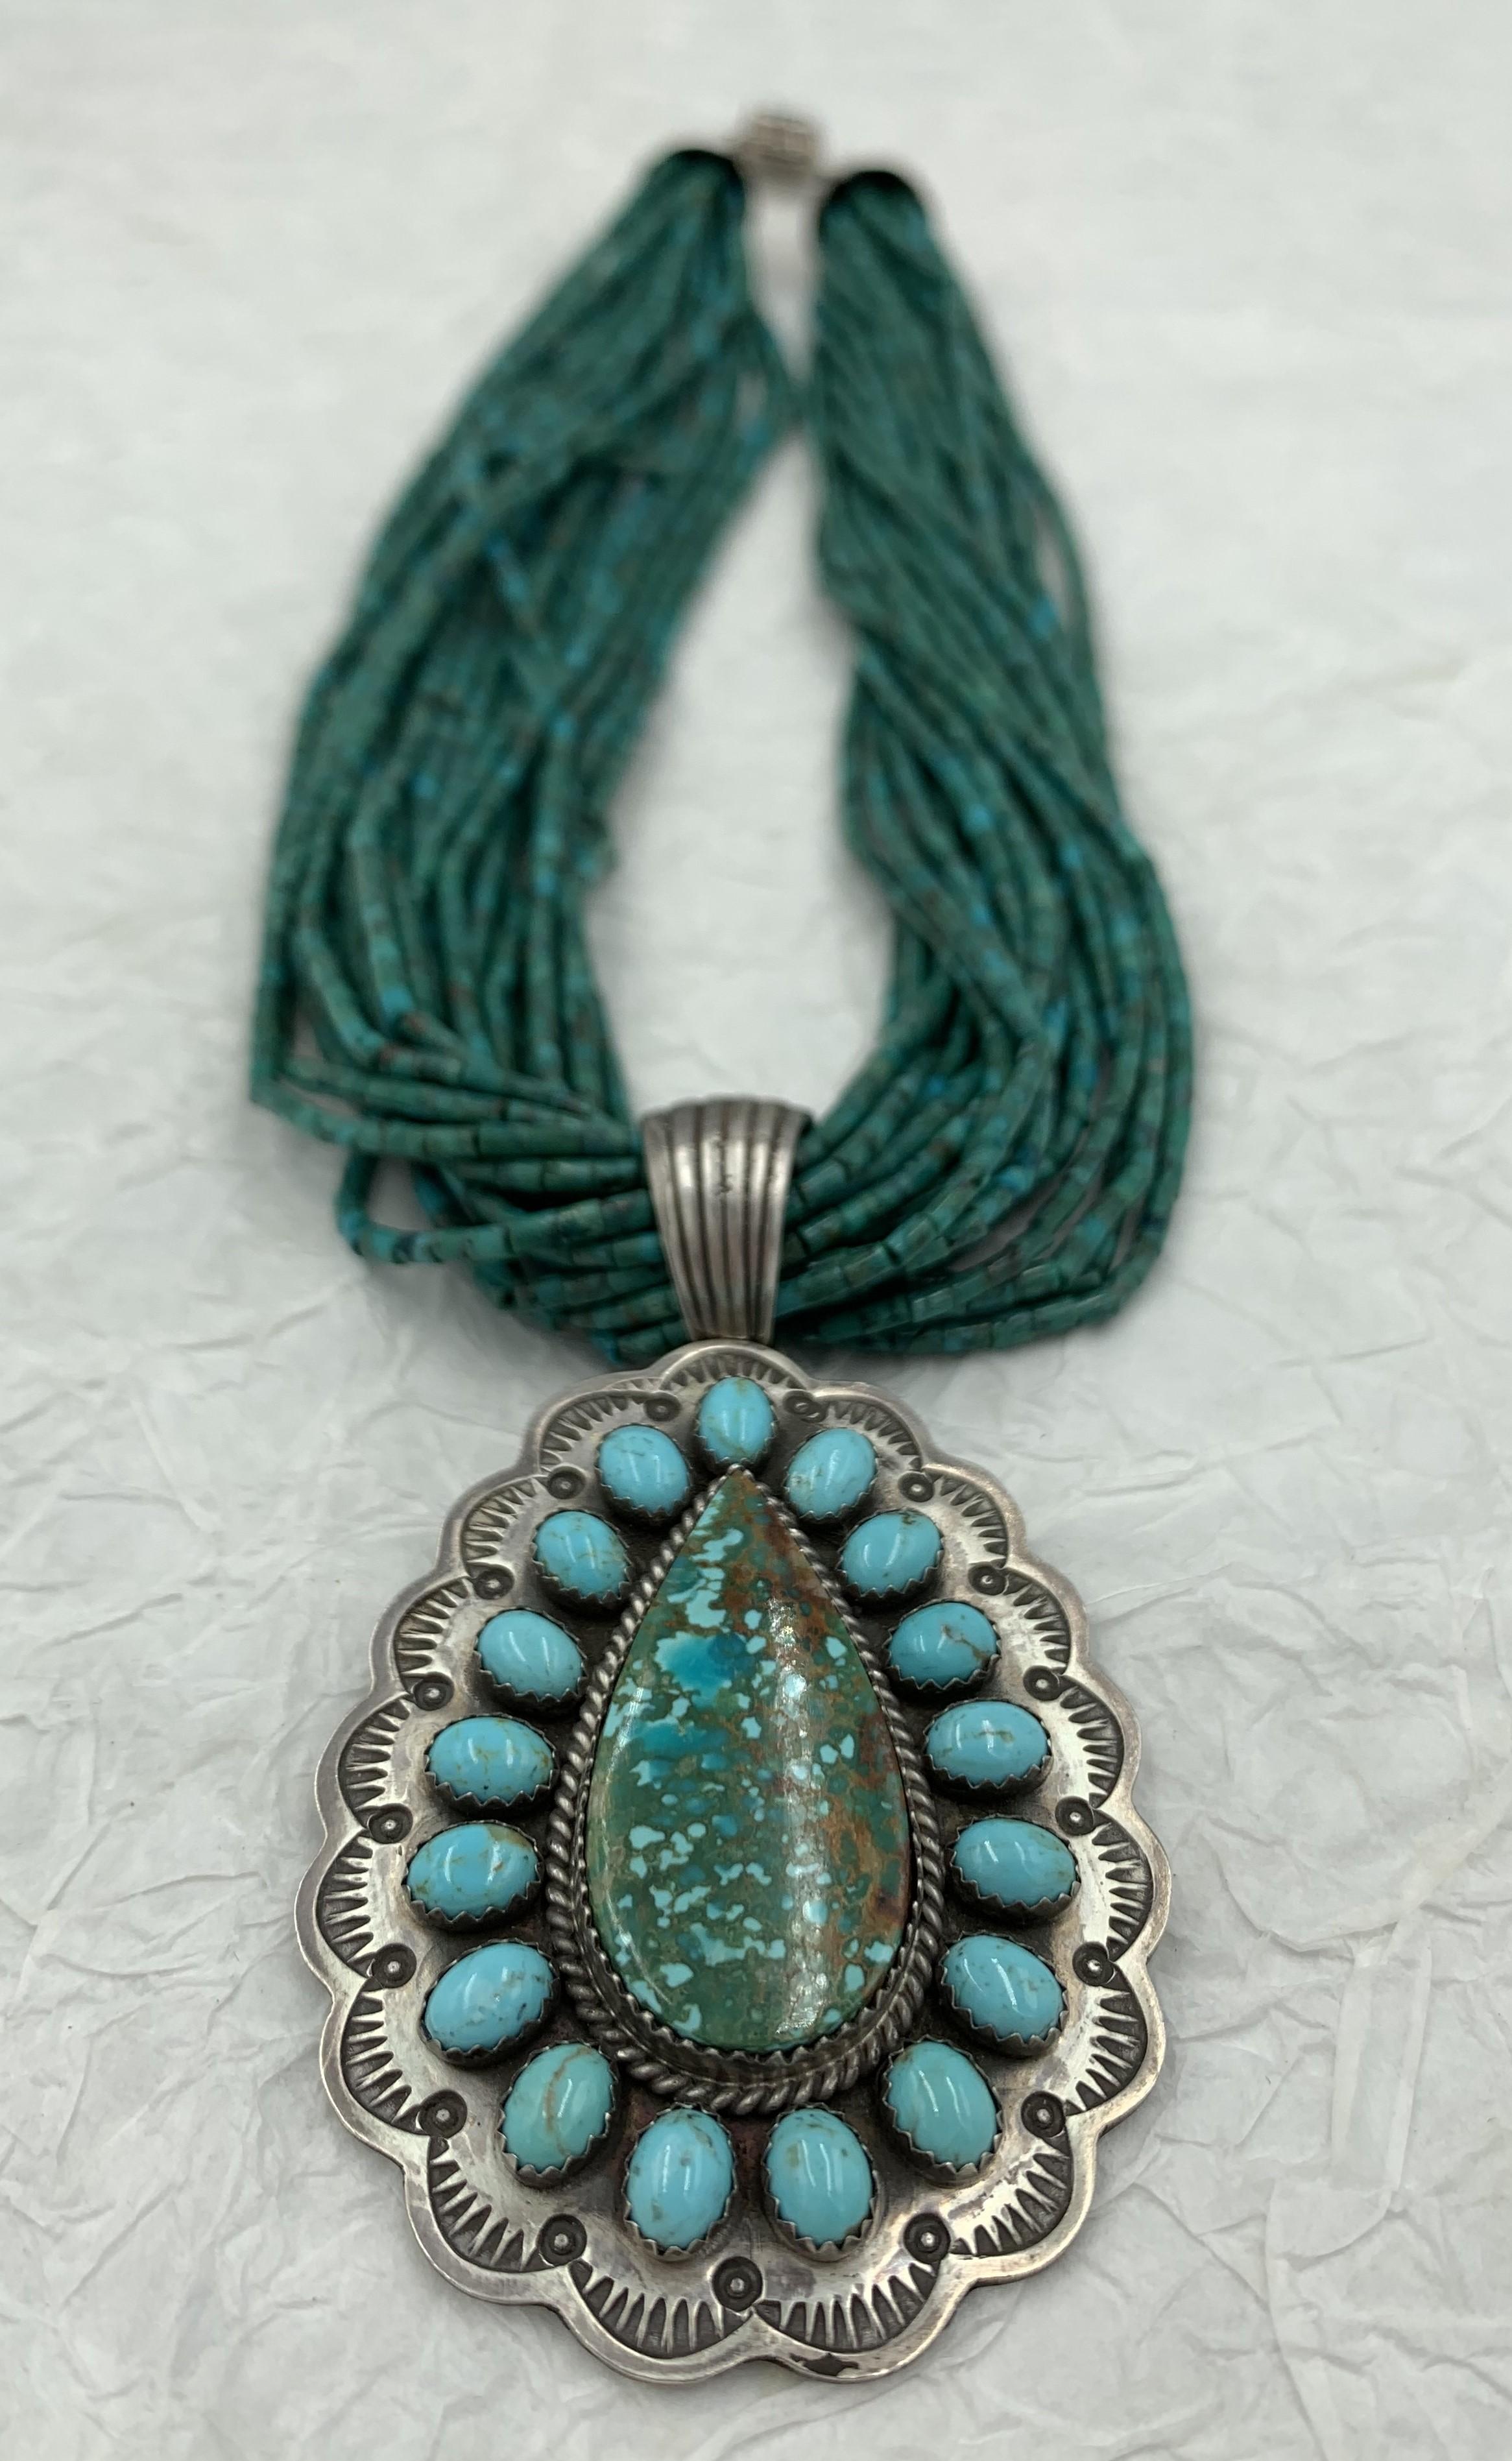 Native American Turquoise Beaded Necklace with Turquoise Pendant For Sale